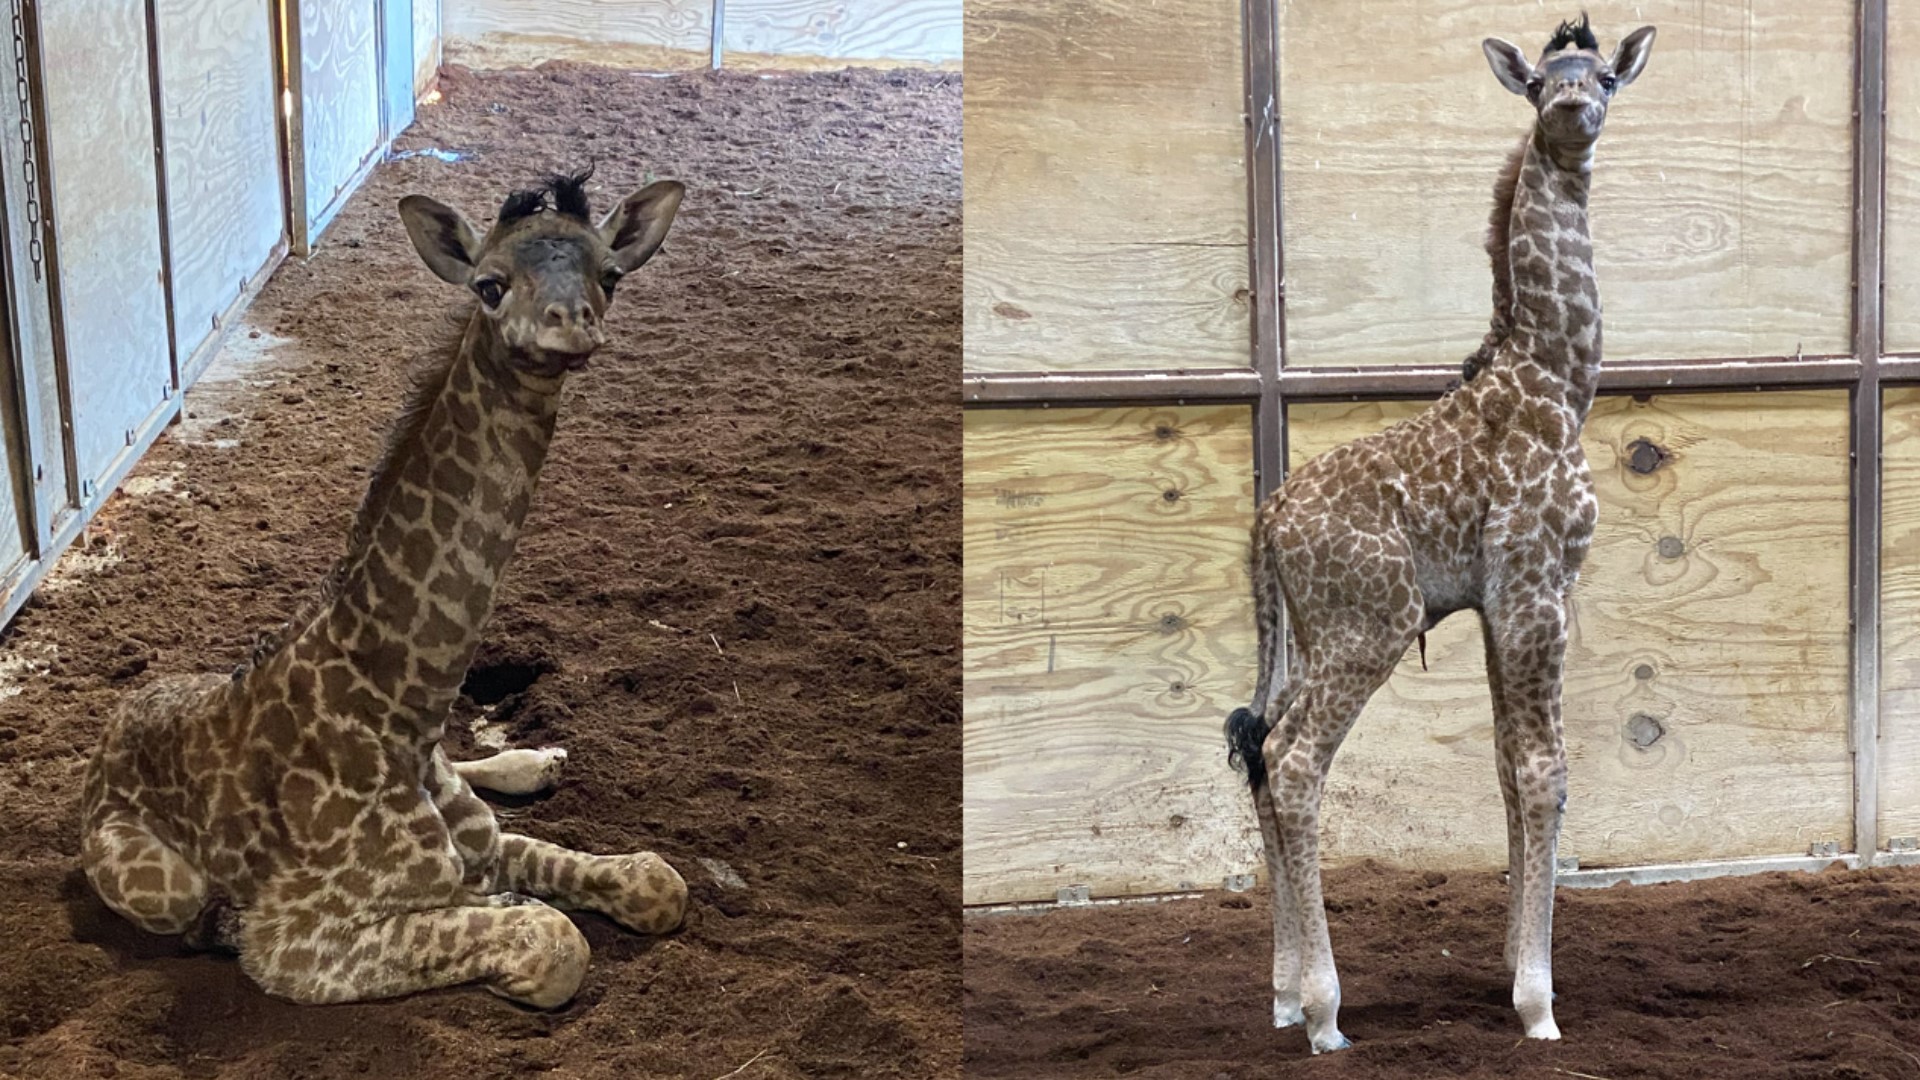 The Wilds announced on Tuesday a new addition to its animal family with the birth of an endangered giraffe earlier this month.